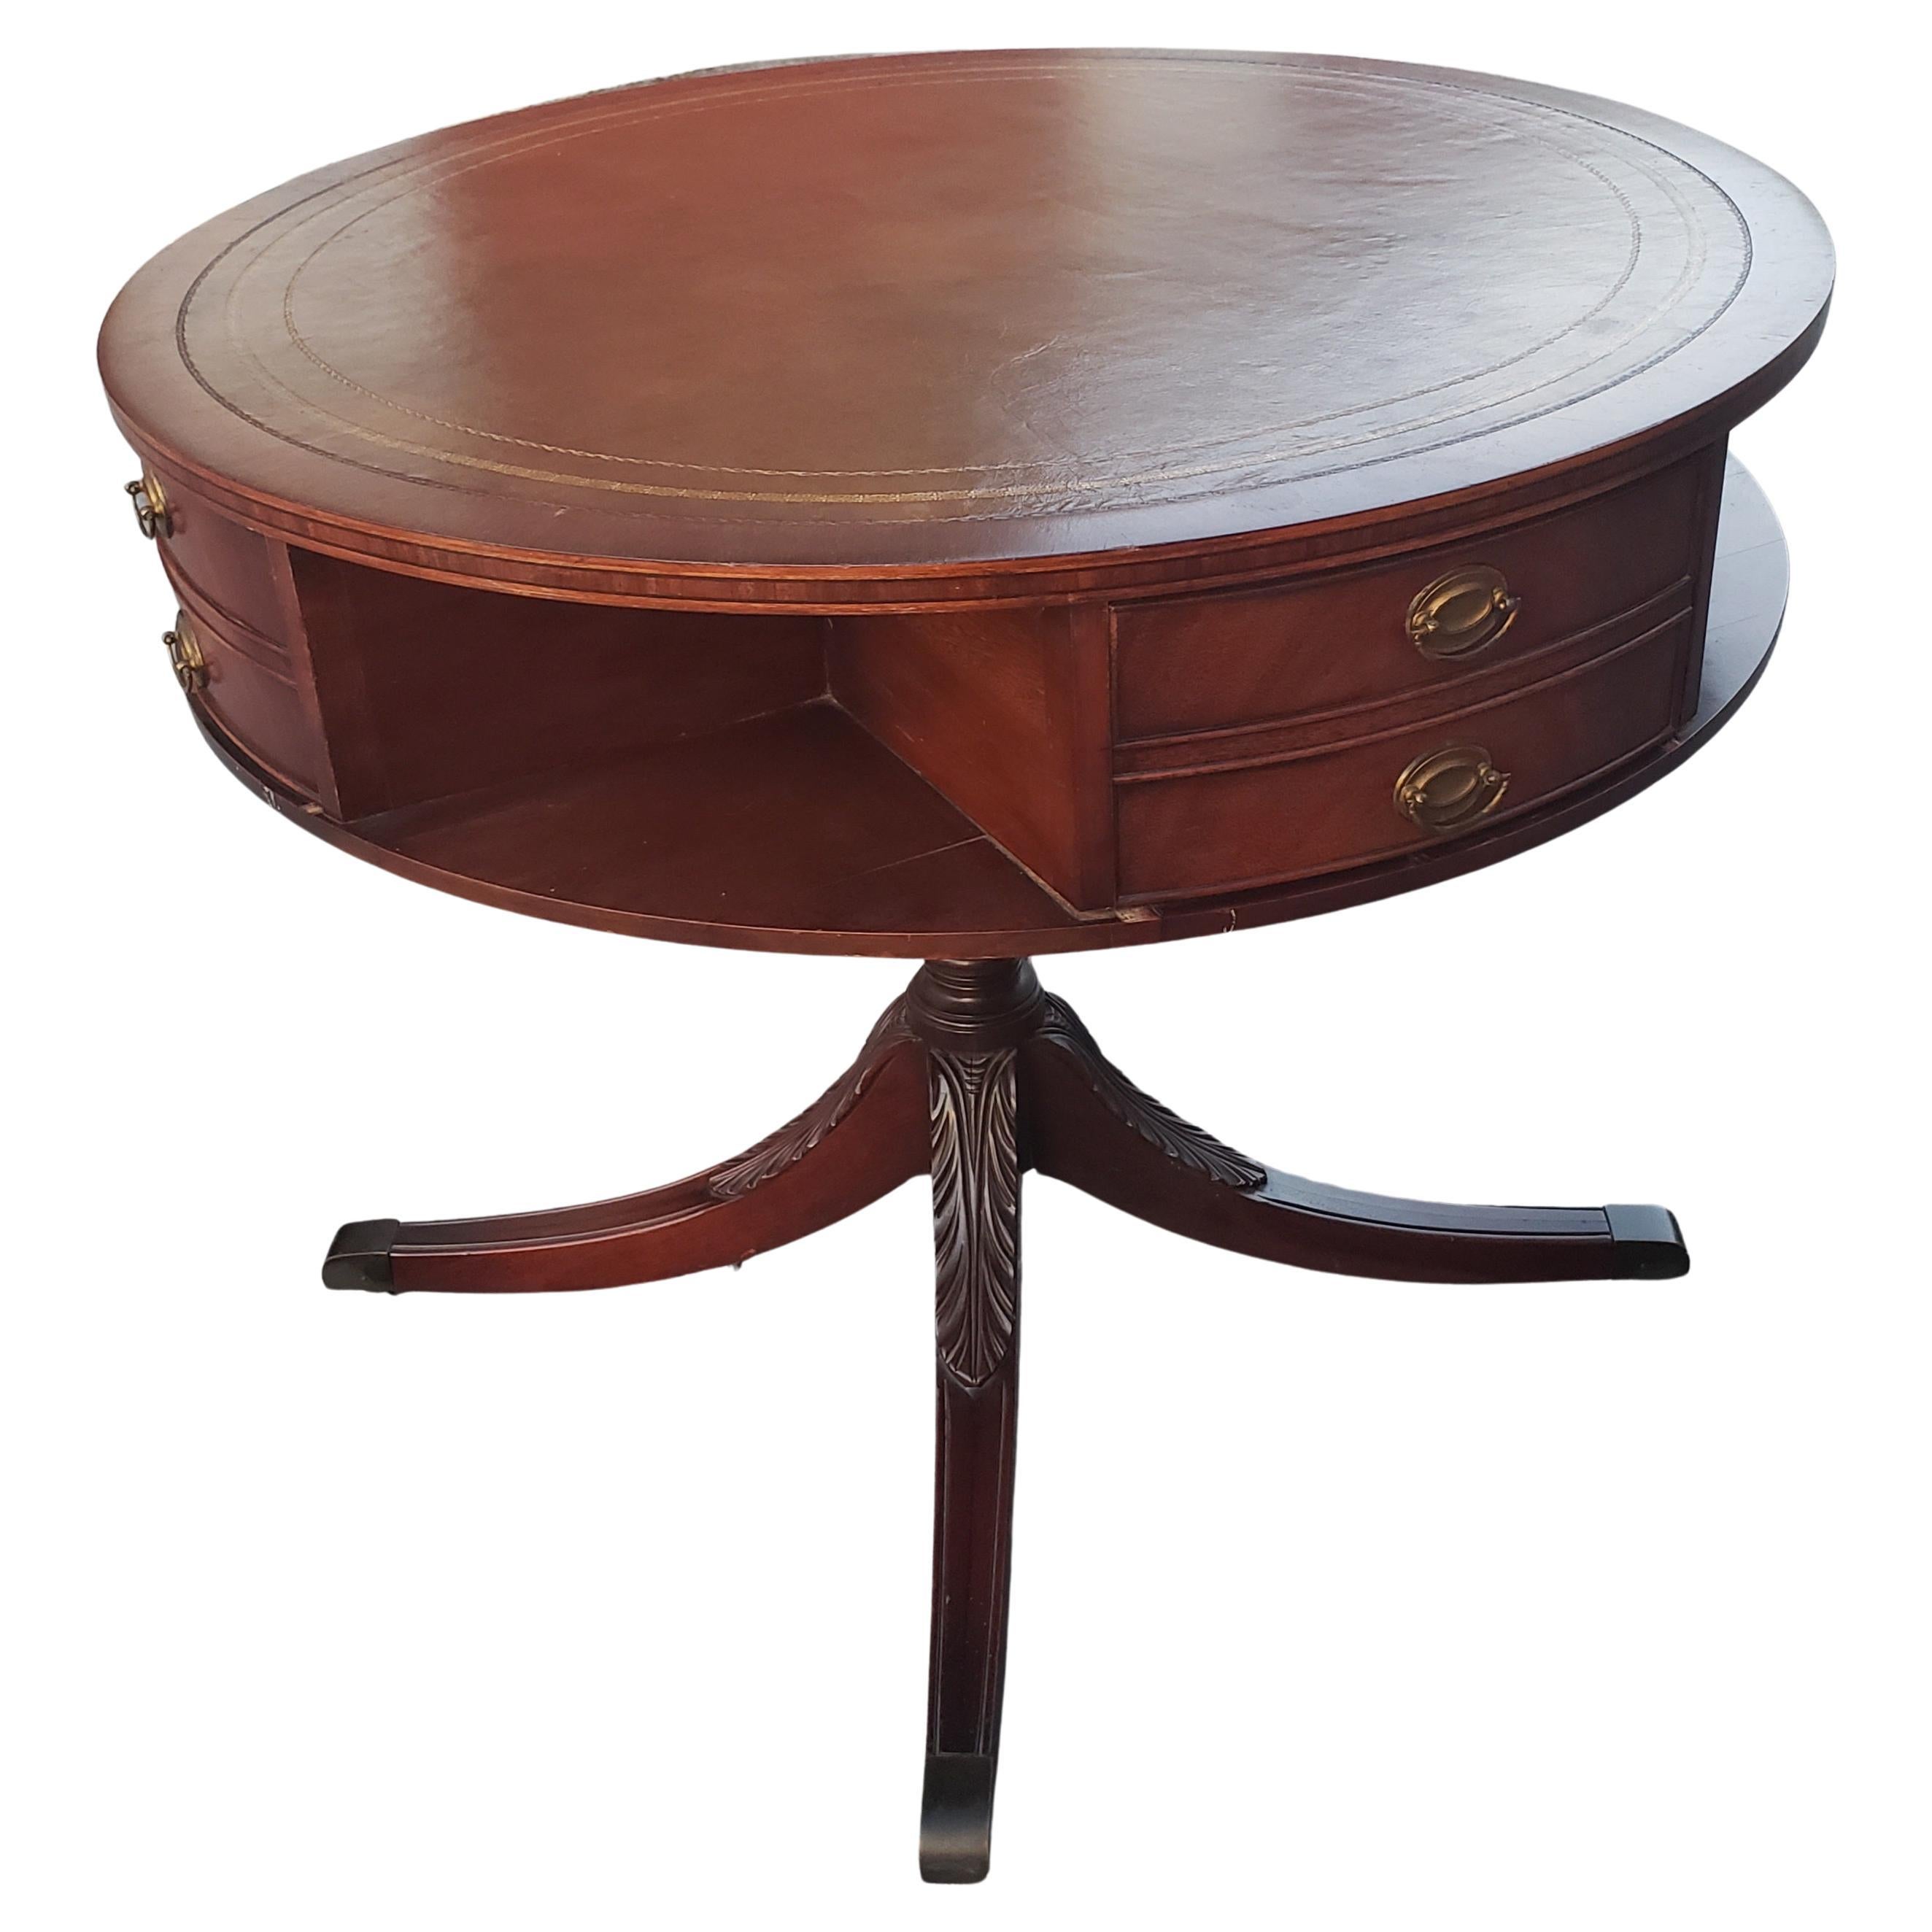 Banded Leather Stenciled Top Double Drum 4-drawer Mahogany Center Table, C 1940s For Sale 1